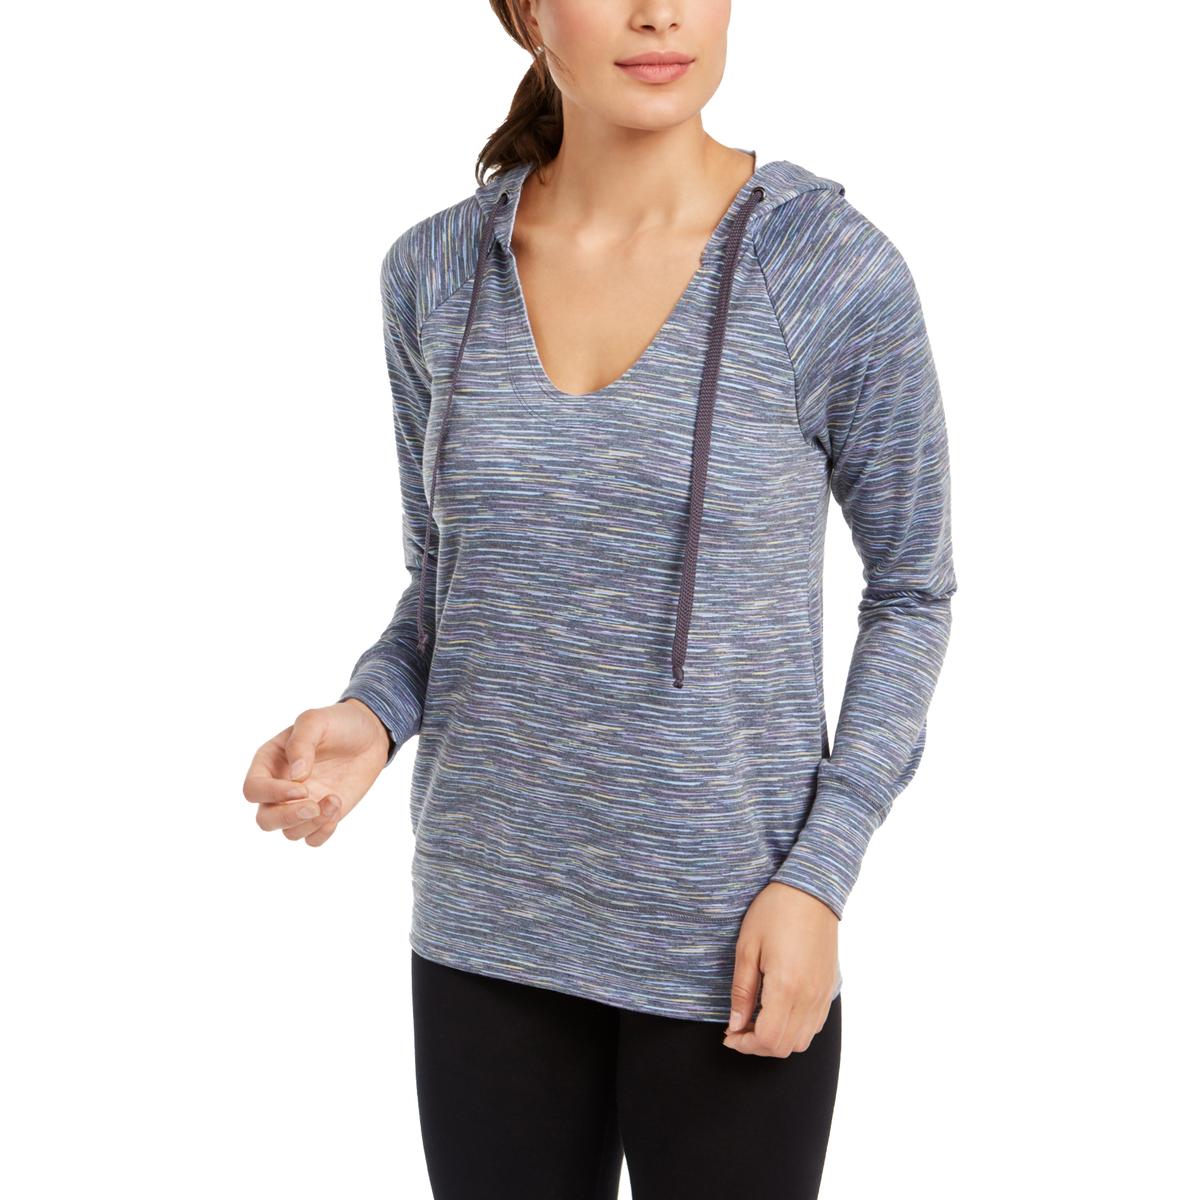 Ideology Womens Plus Fitness Workout Pullover Top Blue 2X